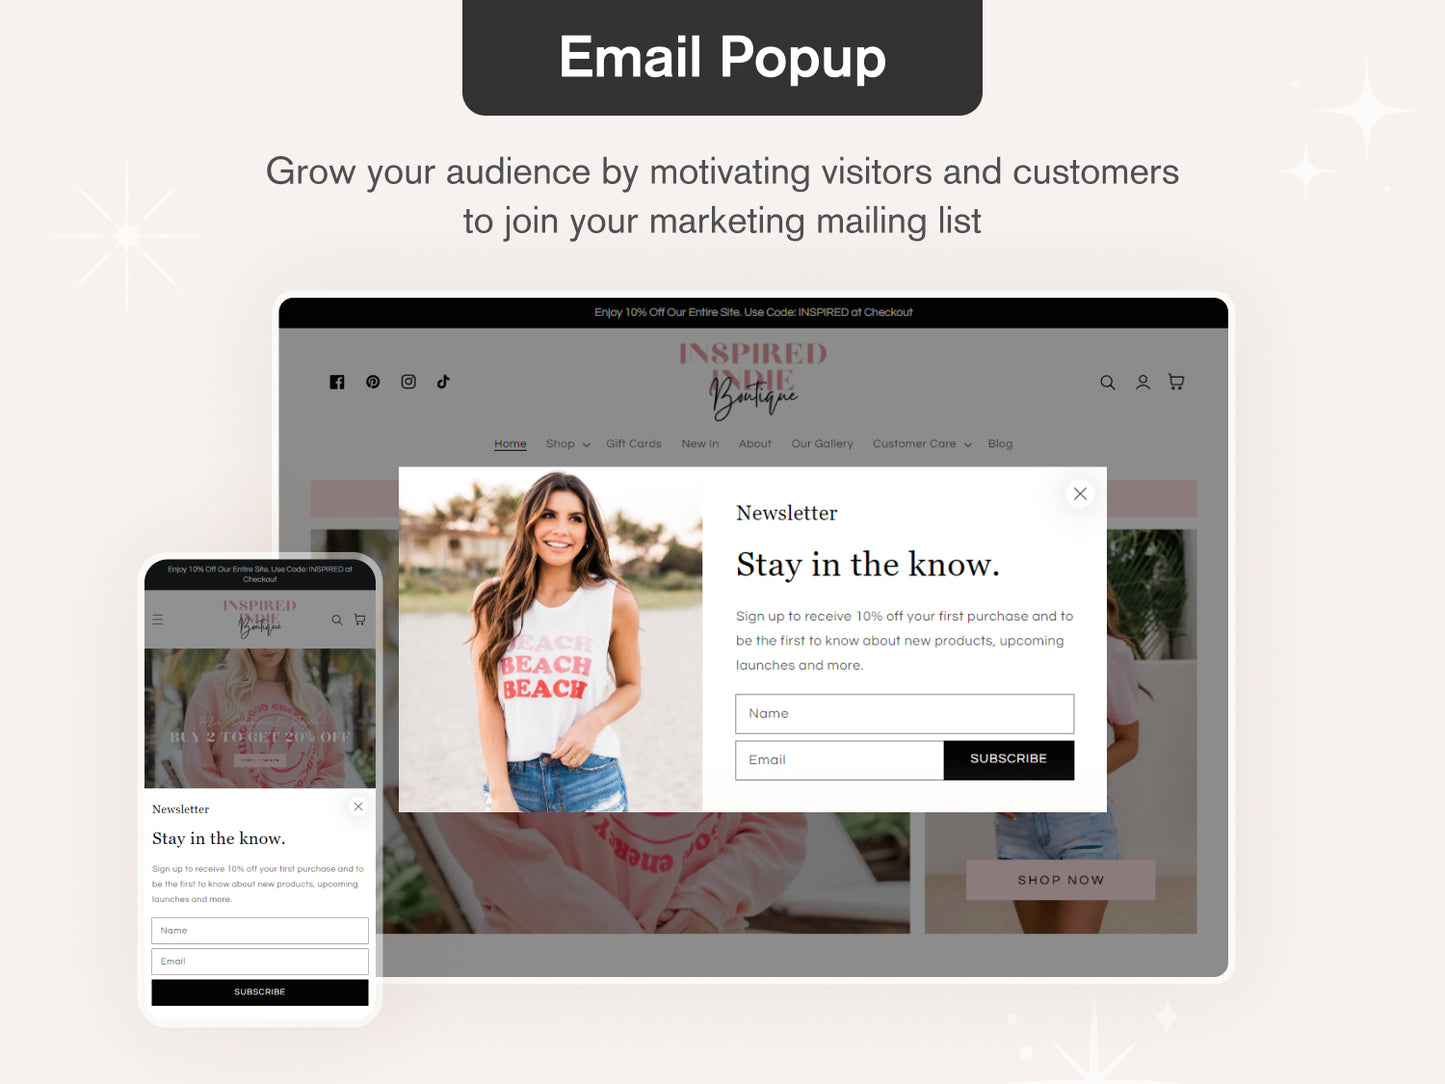 Indie - Pink & Feminine Boutique Shopify Theme